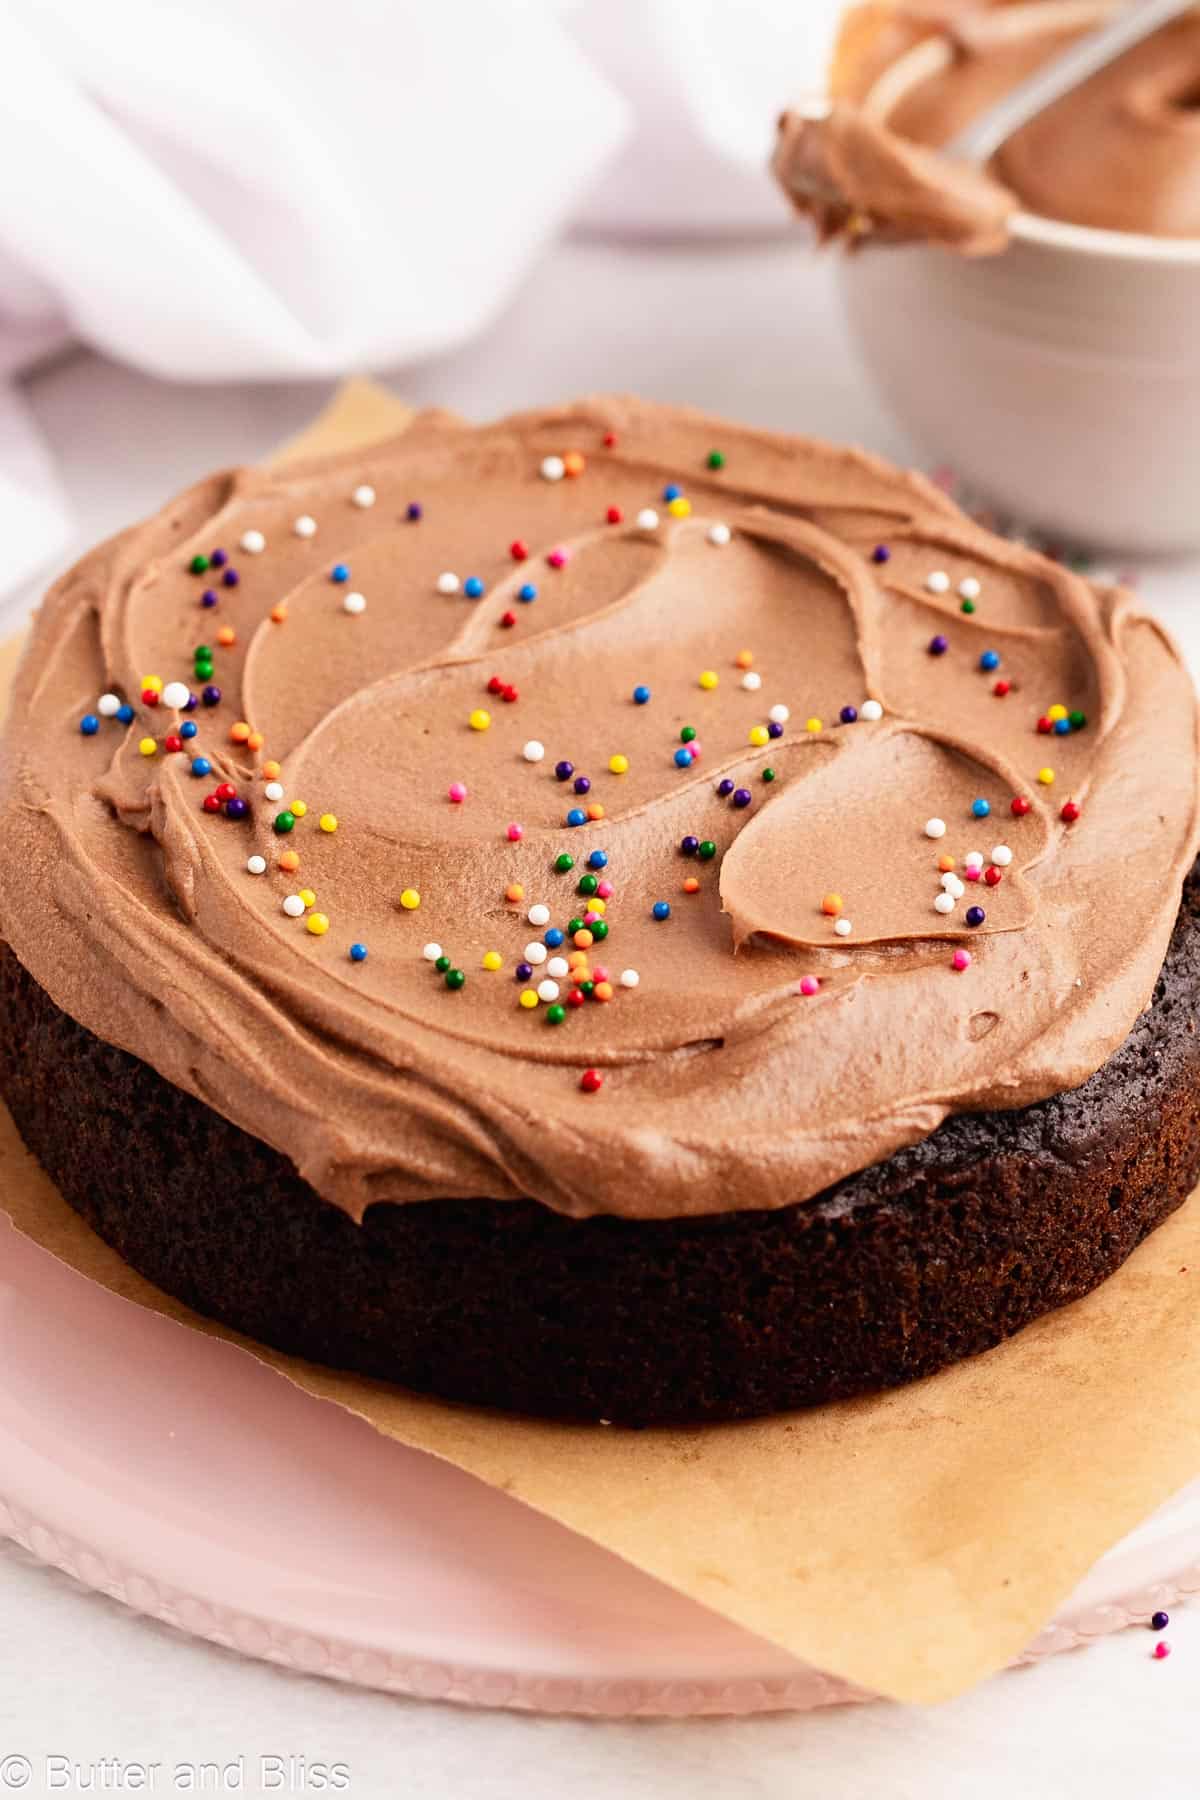 Small chocolate cake frosted with butter free chocolate frosting.